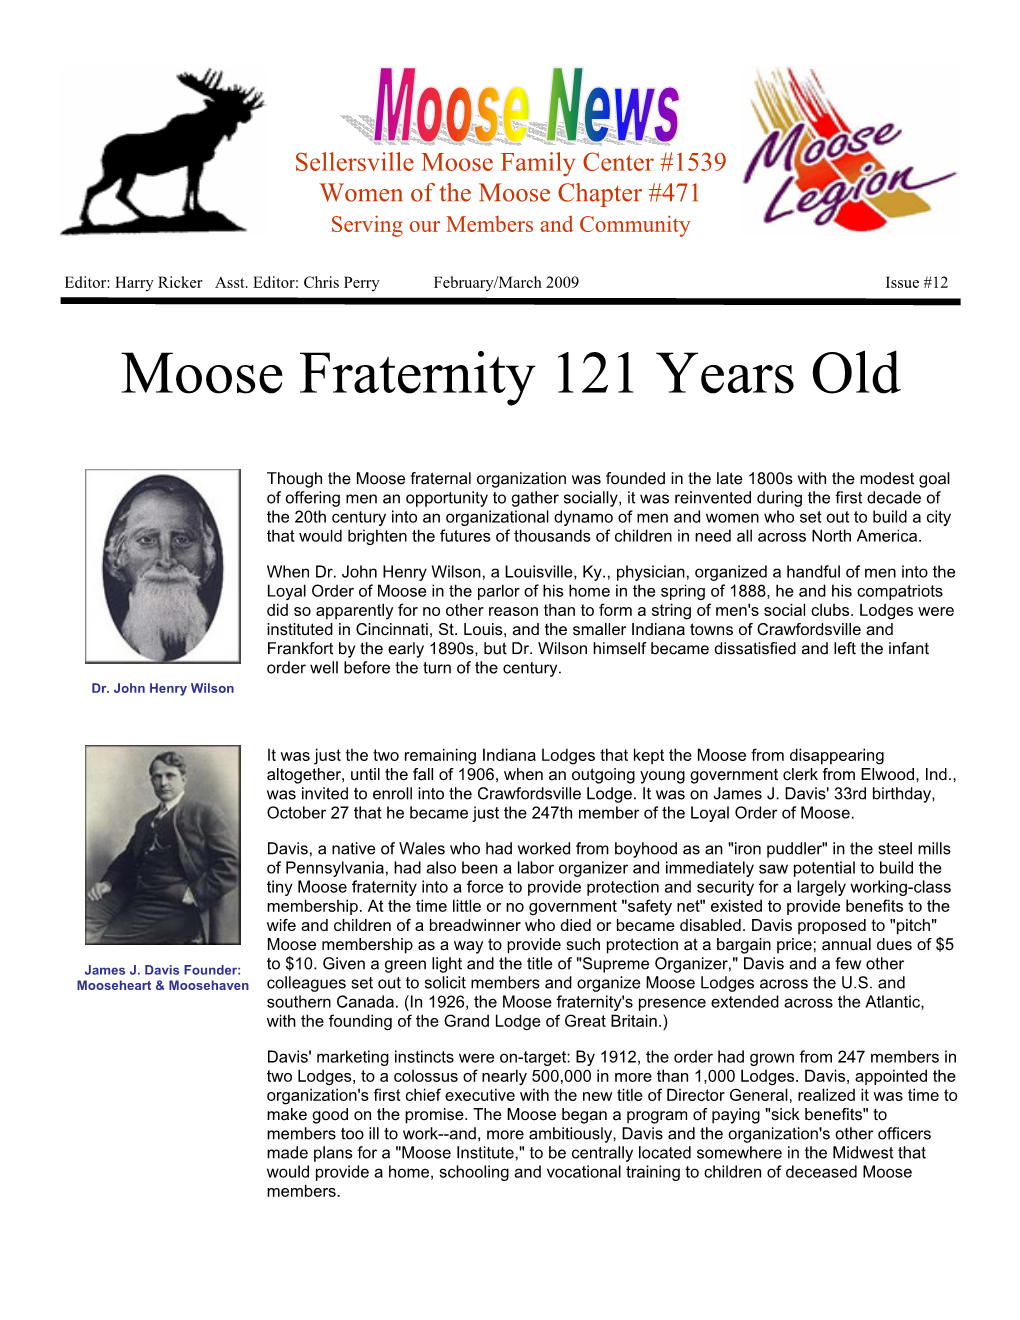 Moose Fraternity 121 Years Old